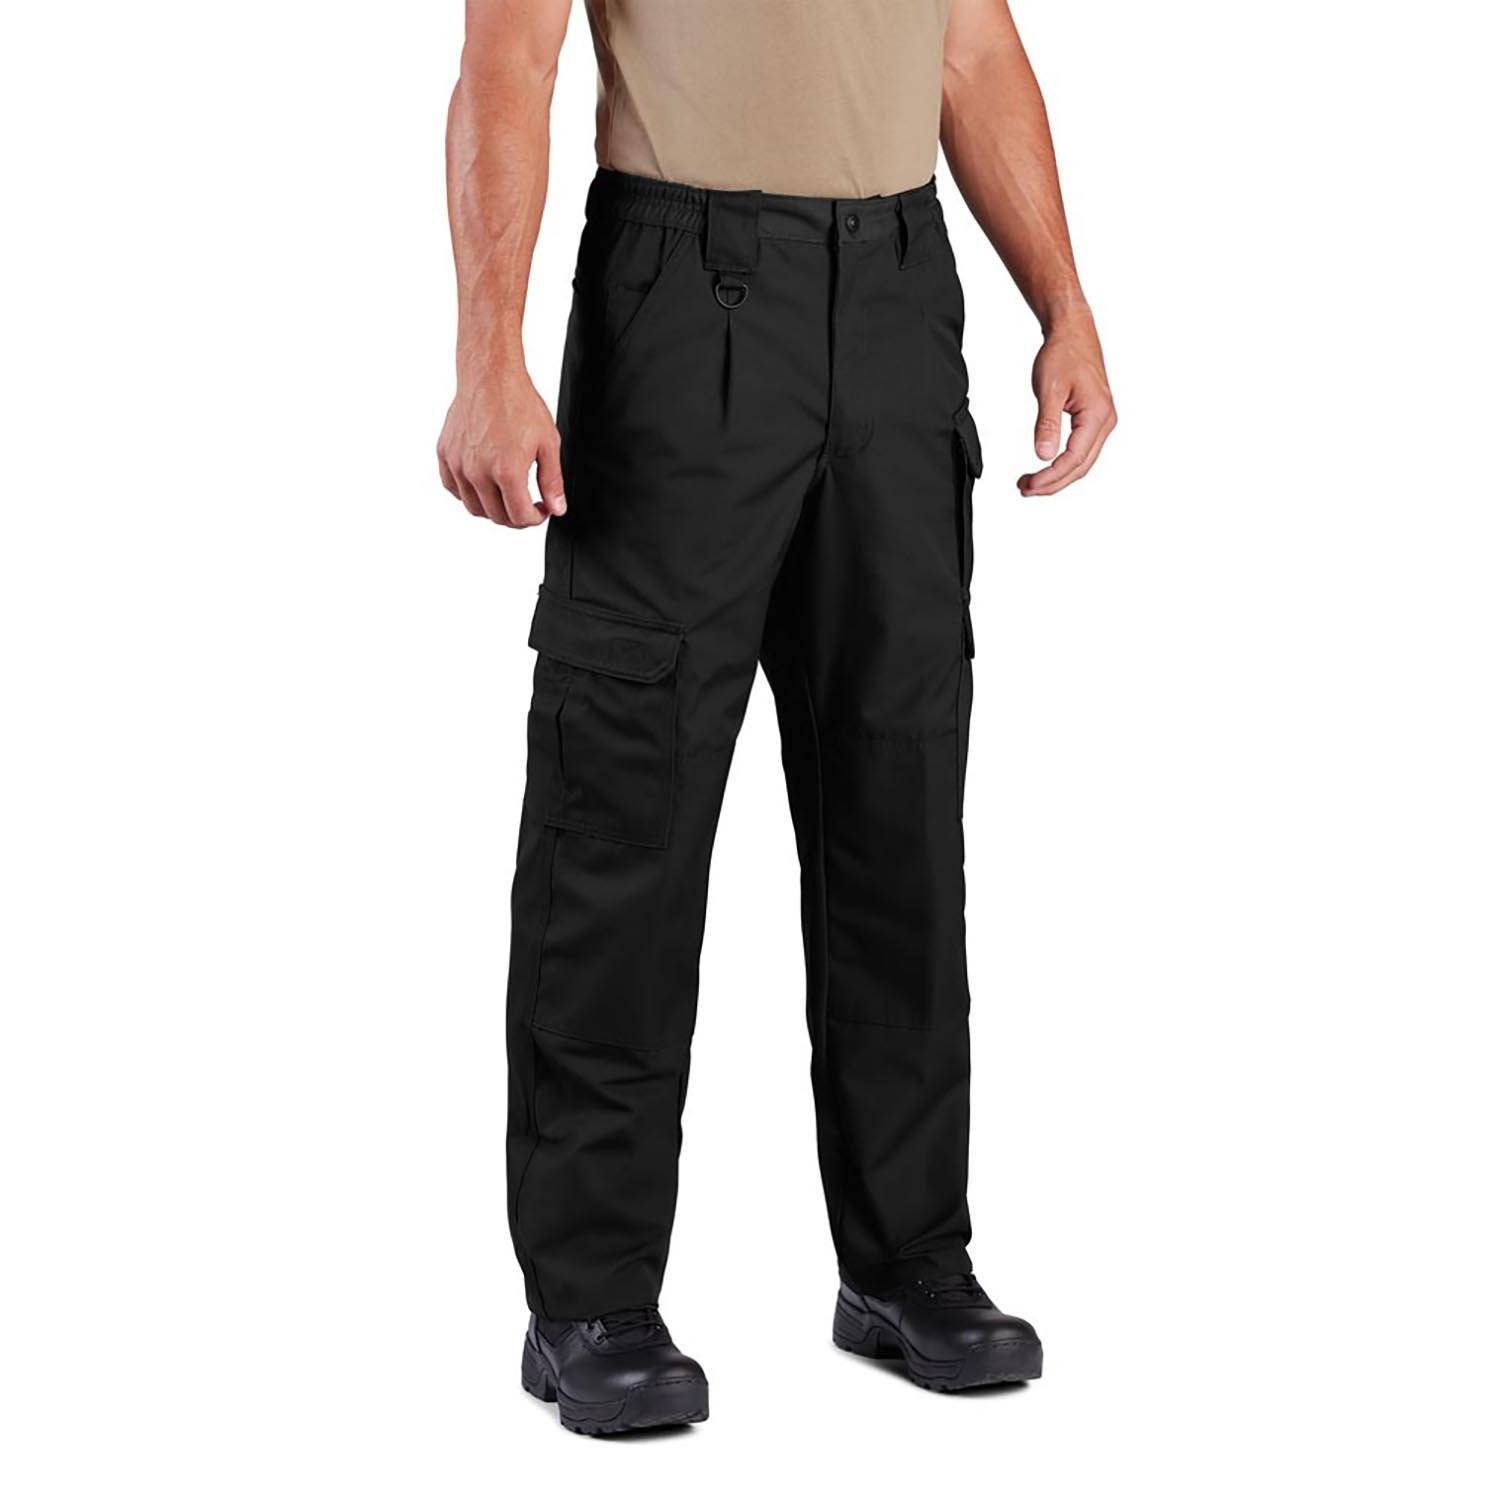 Clearance Under $5 Clothing Man,AXXD Cargo Trousers Workwear Cargo 6 Pocket  Full Pantss Sweatpants Size 14-16 Black S 